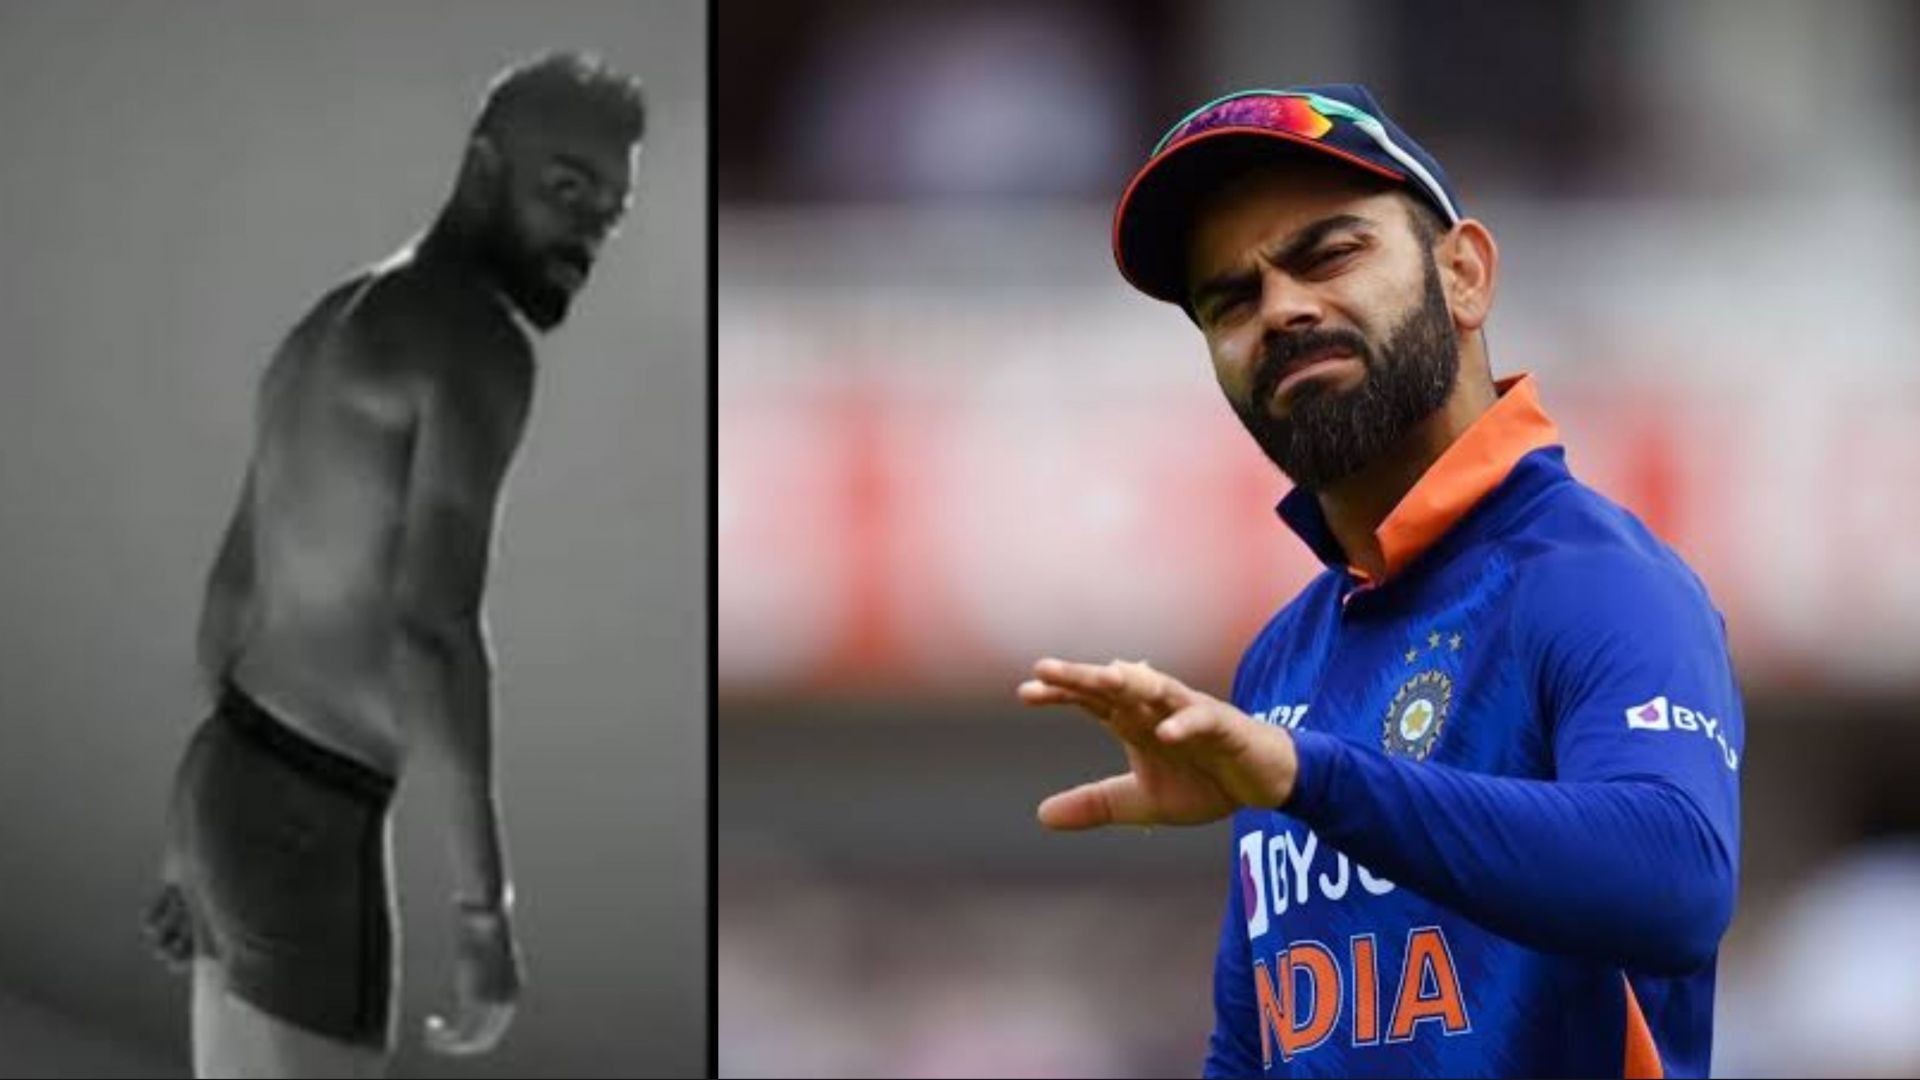 Virat Kohli has seen many ups and downs in his life (Image: YouTube/Getty)